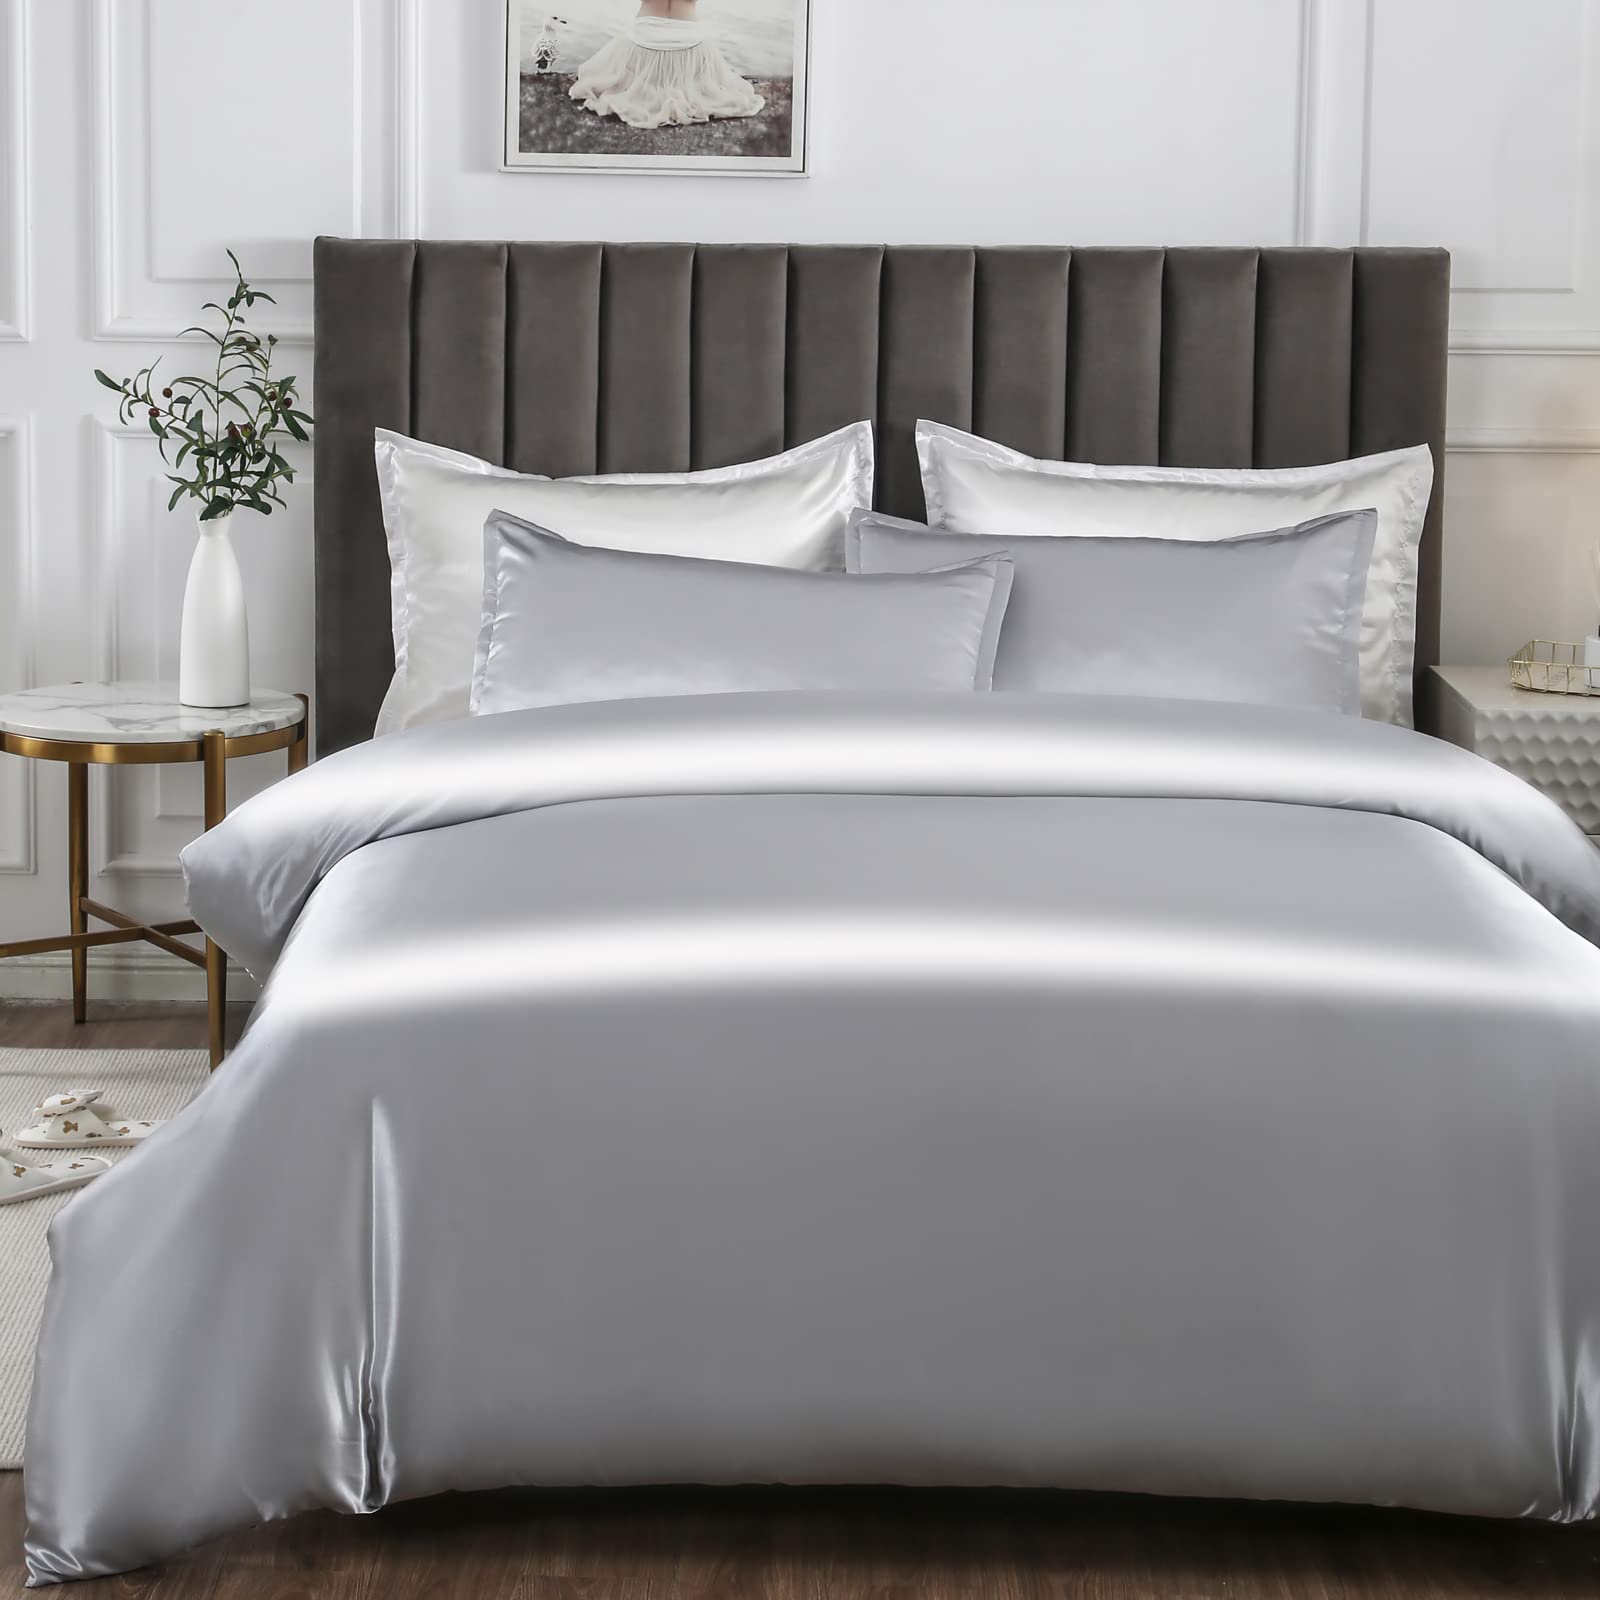 Morbuy Silk Satin King Duvet Cover with 2 Pillowcases, Silver Bedding Set Easy Care Duvet Cover Set with Zipper Closure - Luxury Ultra Soft Quilt Cover 3 Piece - 220x230cm